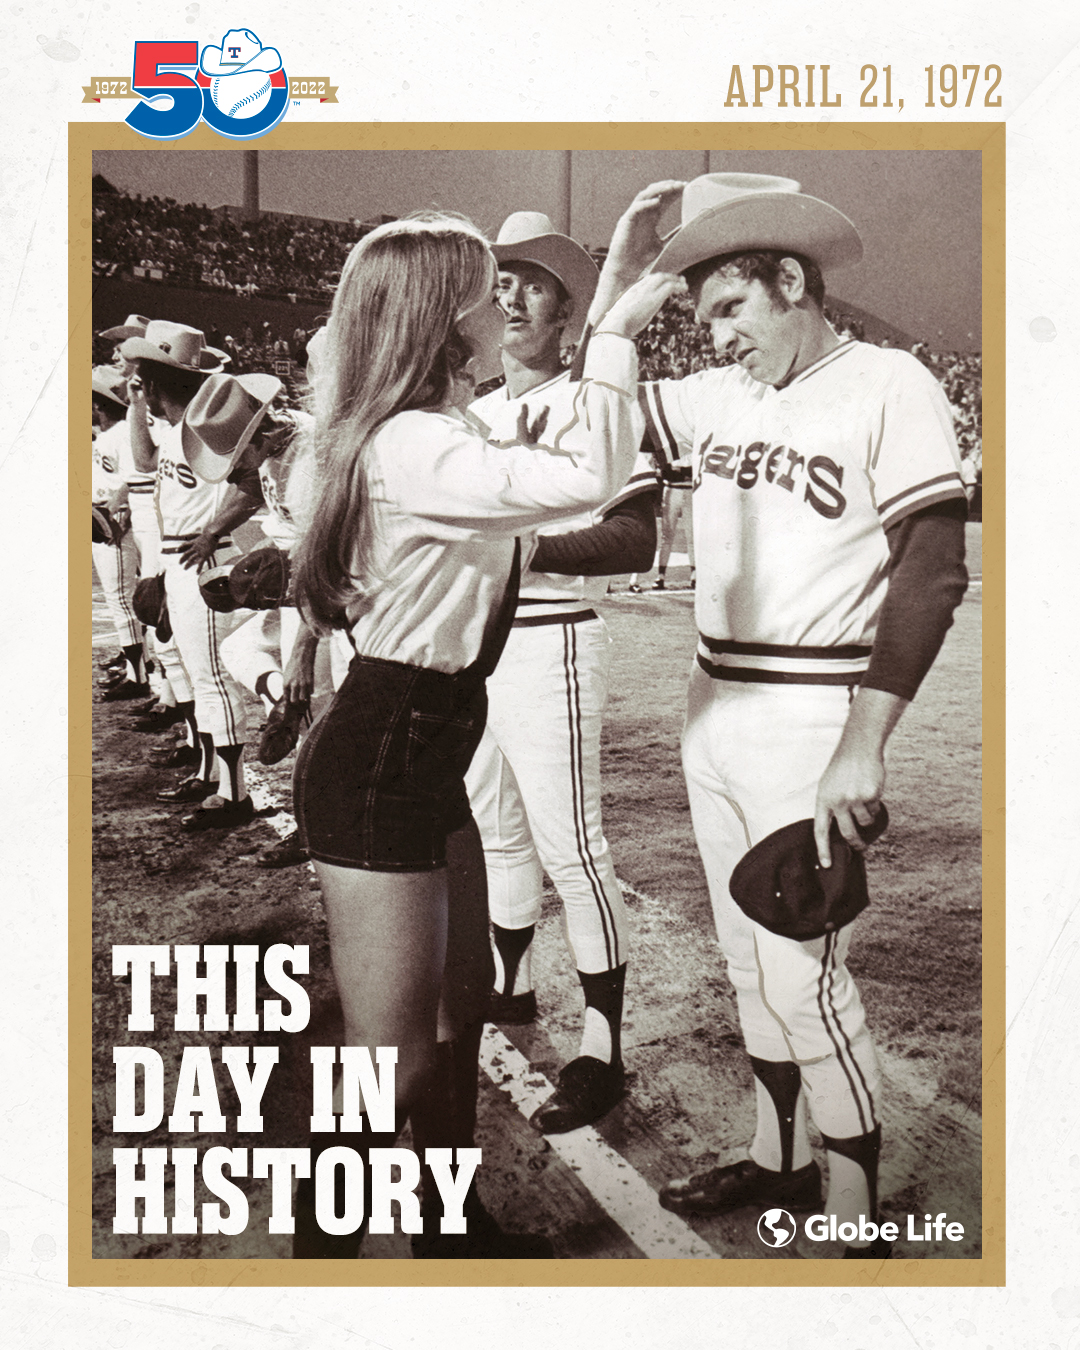 1972 Texas Rangers Official Program. From the inaugural season that, Lot  #12409